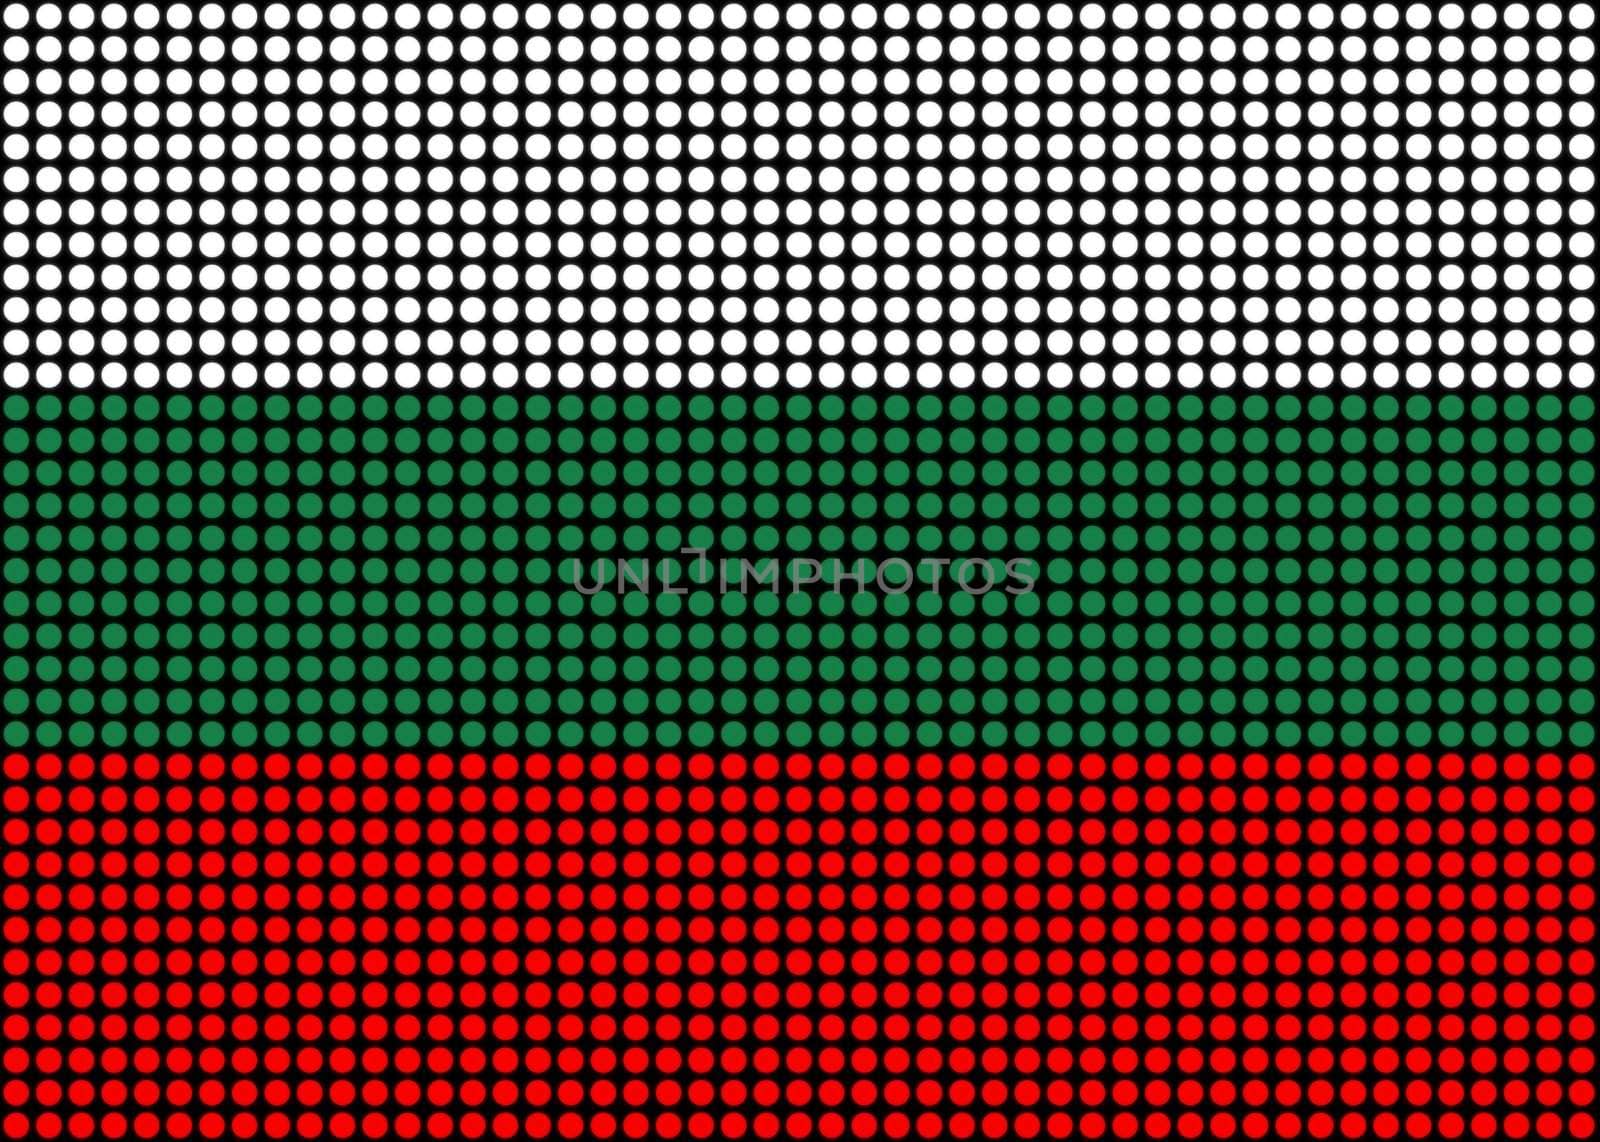 Illustration of an abstract Bulgaria Flag made of dots